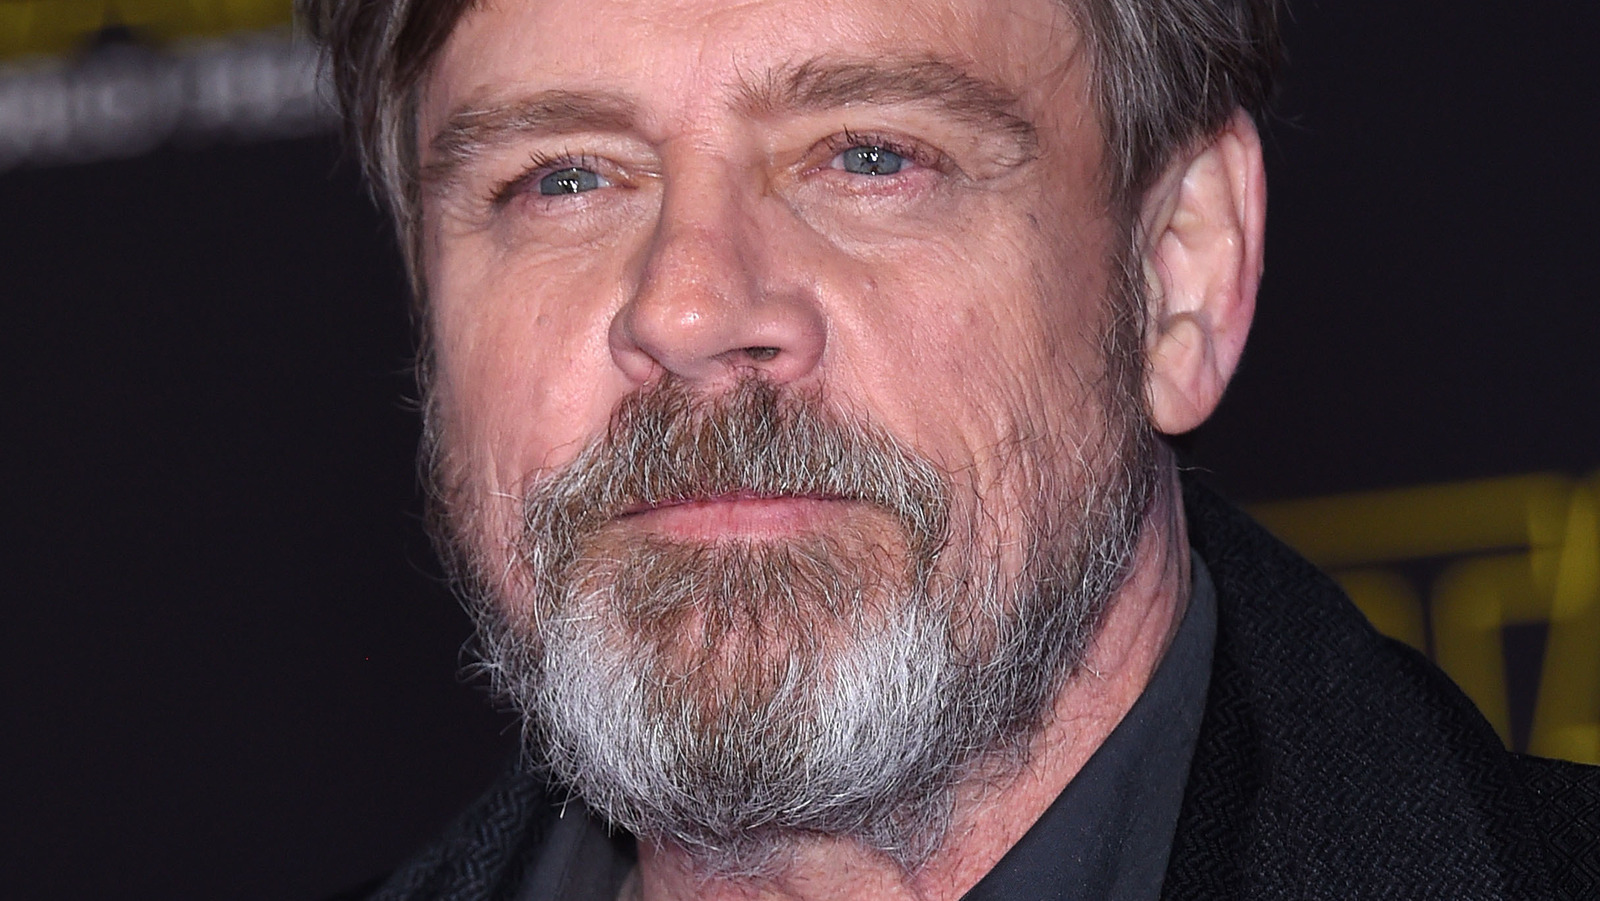 So how did Harrison Ford not get typecast when Mark Hamill did